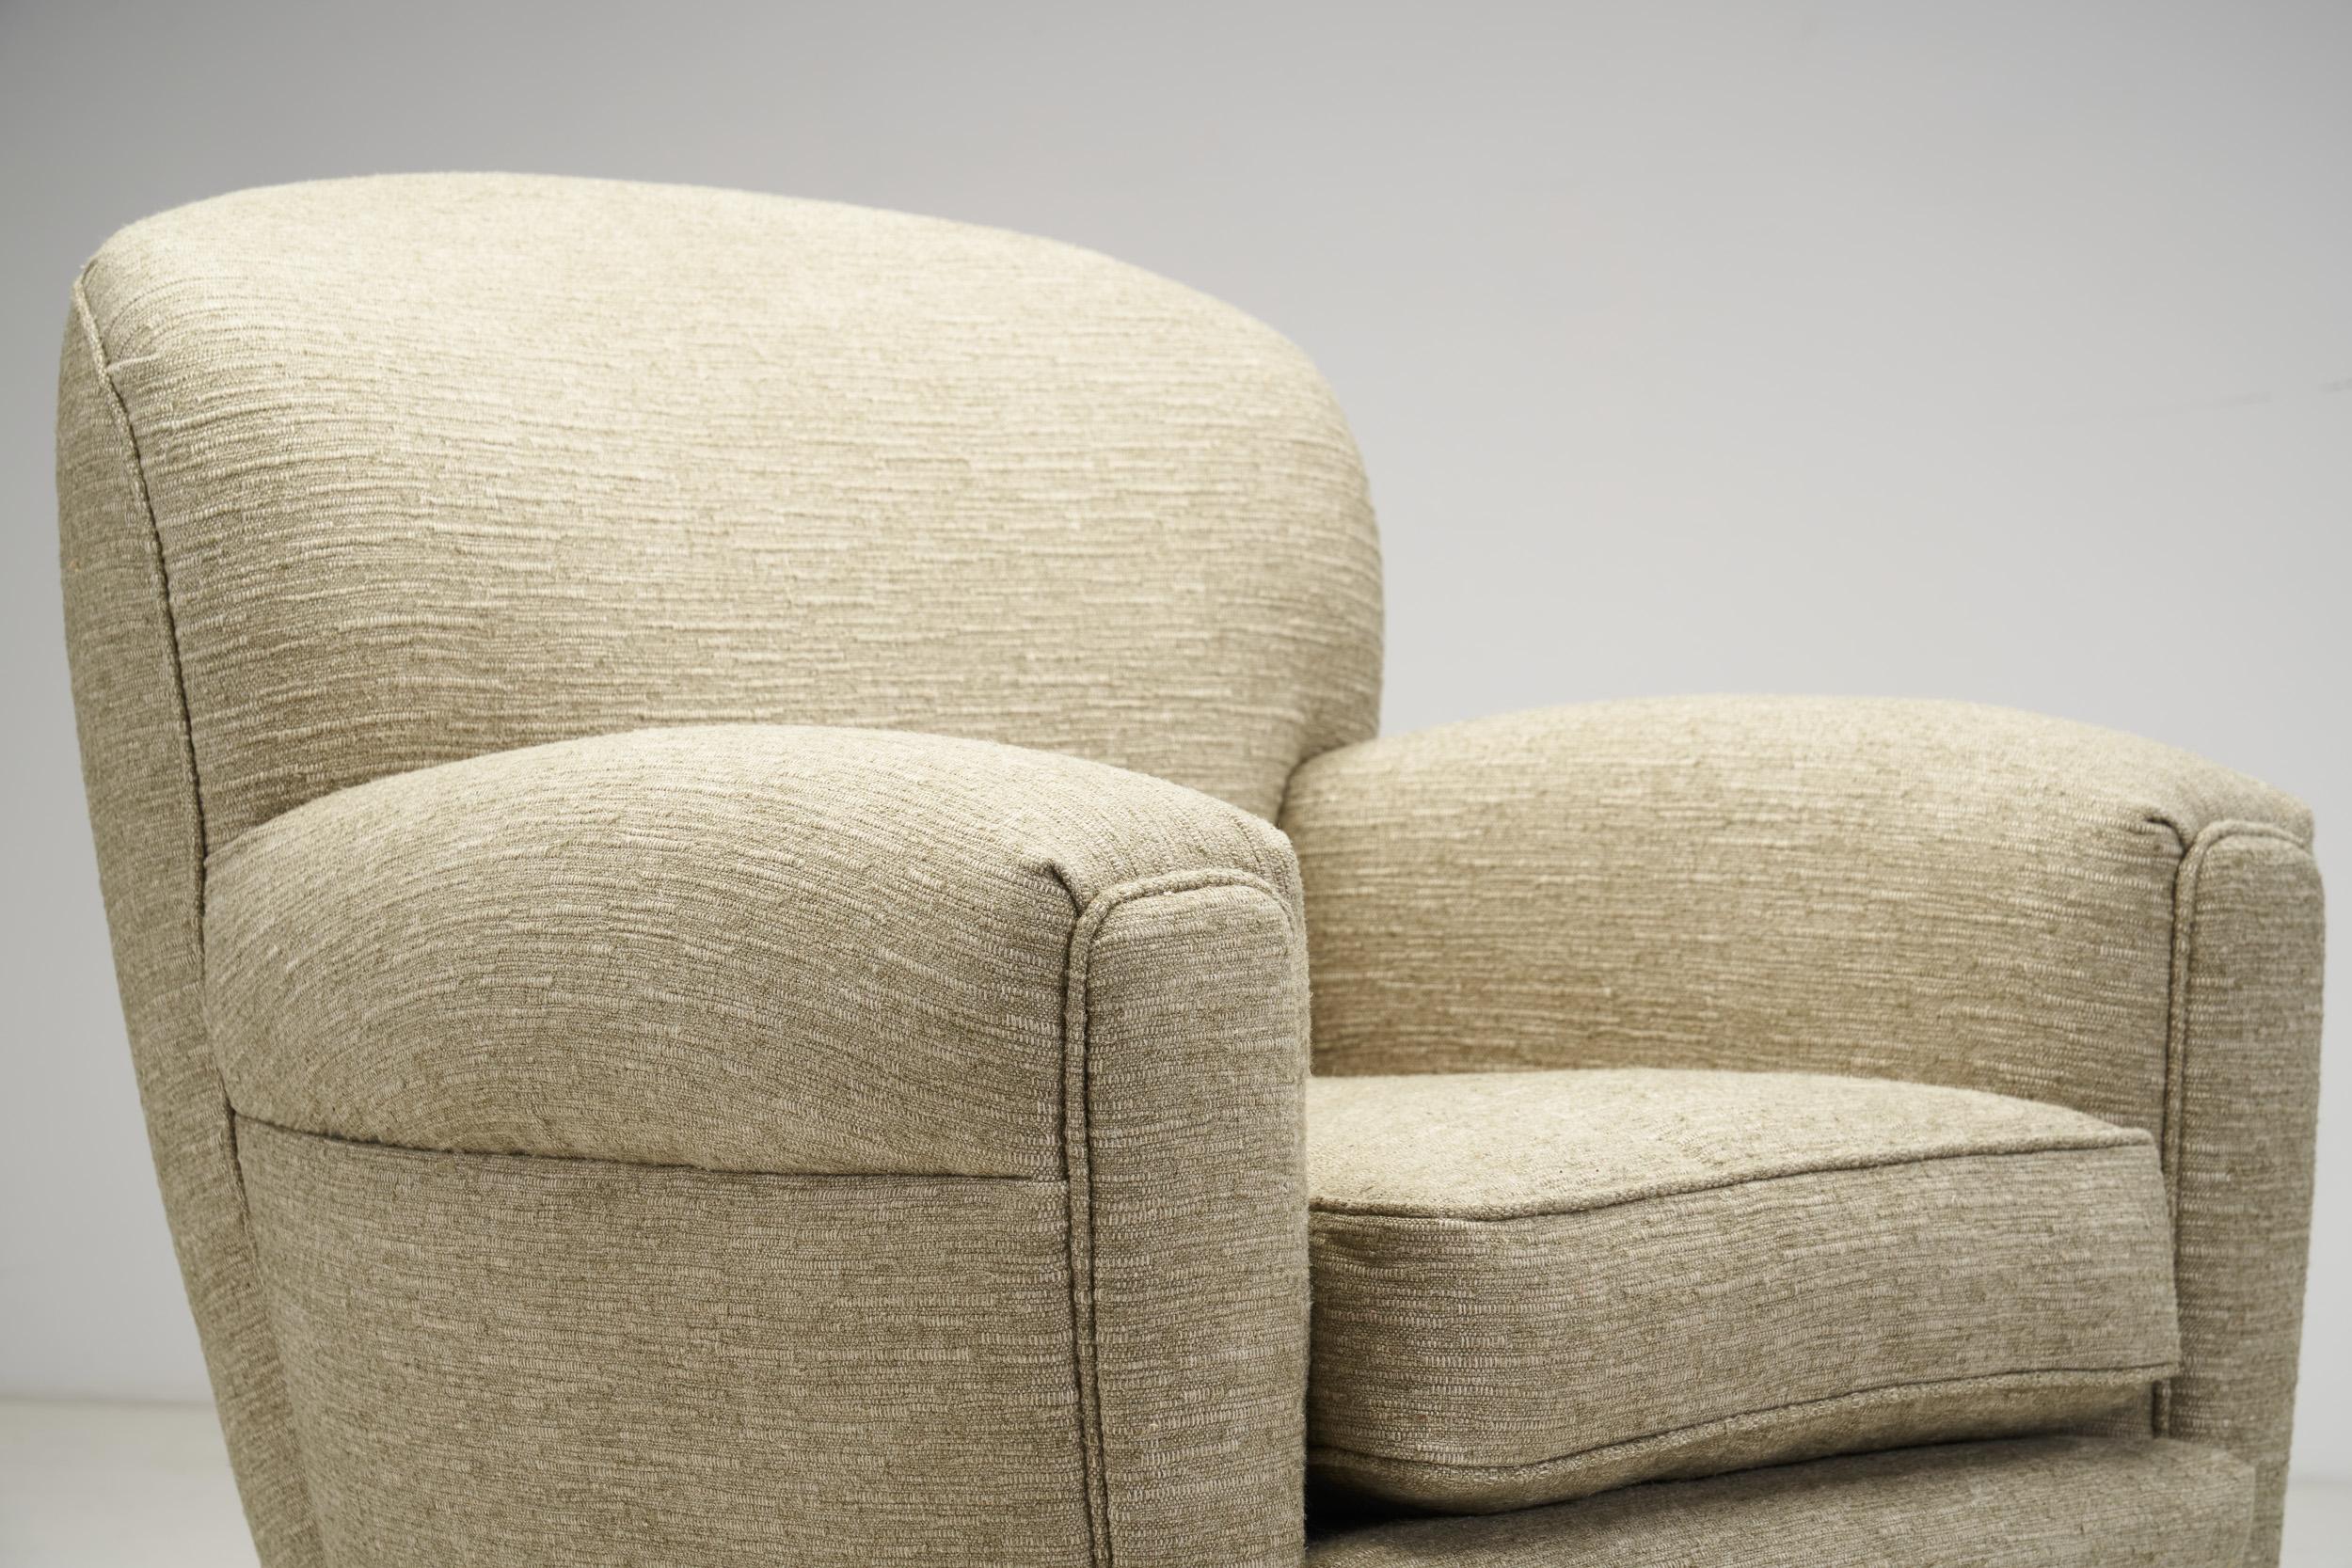 Italian Modern Upholstered Armchairs with Tapered Feet, Italy, circa 1950s For Sale 2